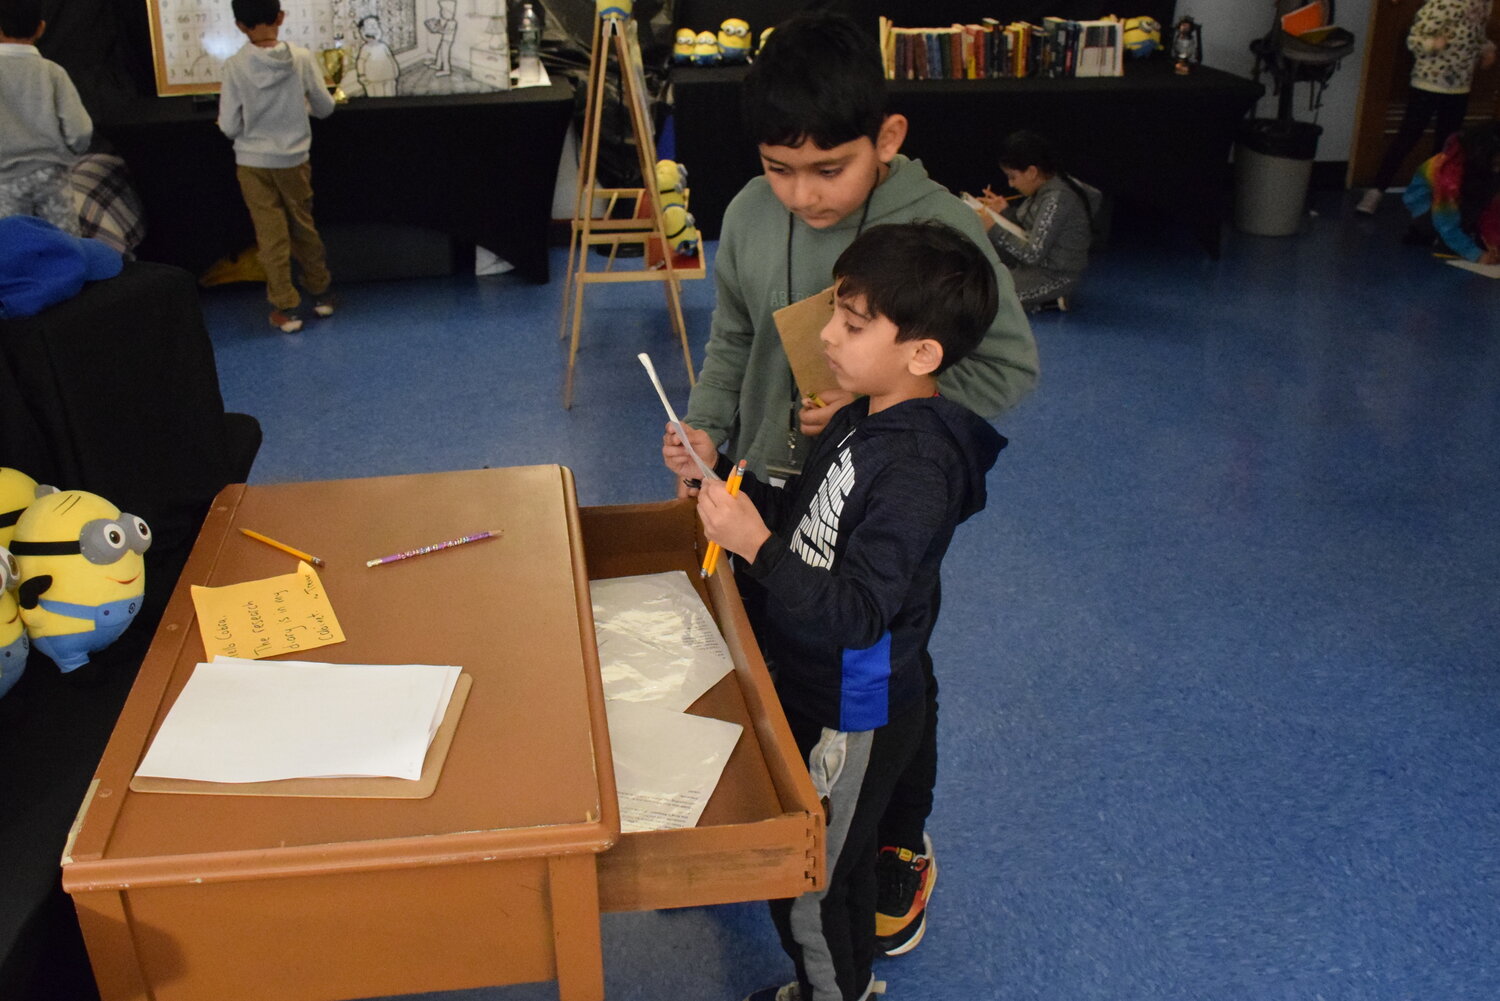 On Jan. 11, second graders at Parkway Elementary School in East Meadow teamed up to track down the legendary artifacts of the ‘King’s Request’ as part of the school’s Submerge Storytelling program.